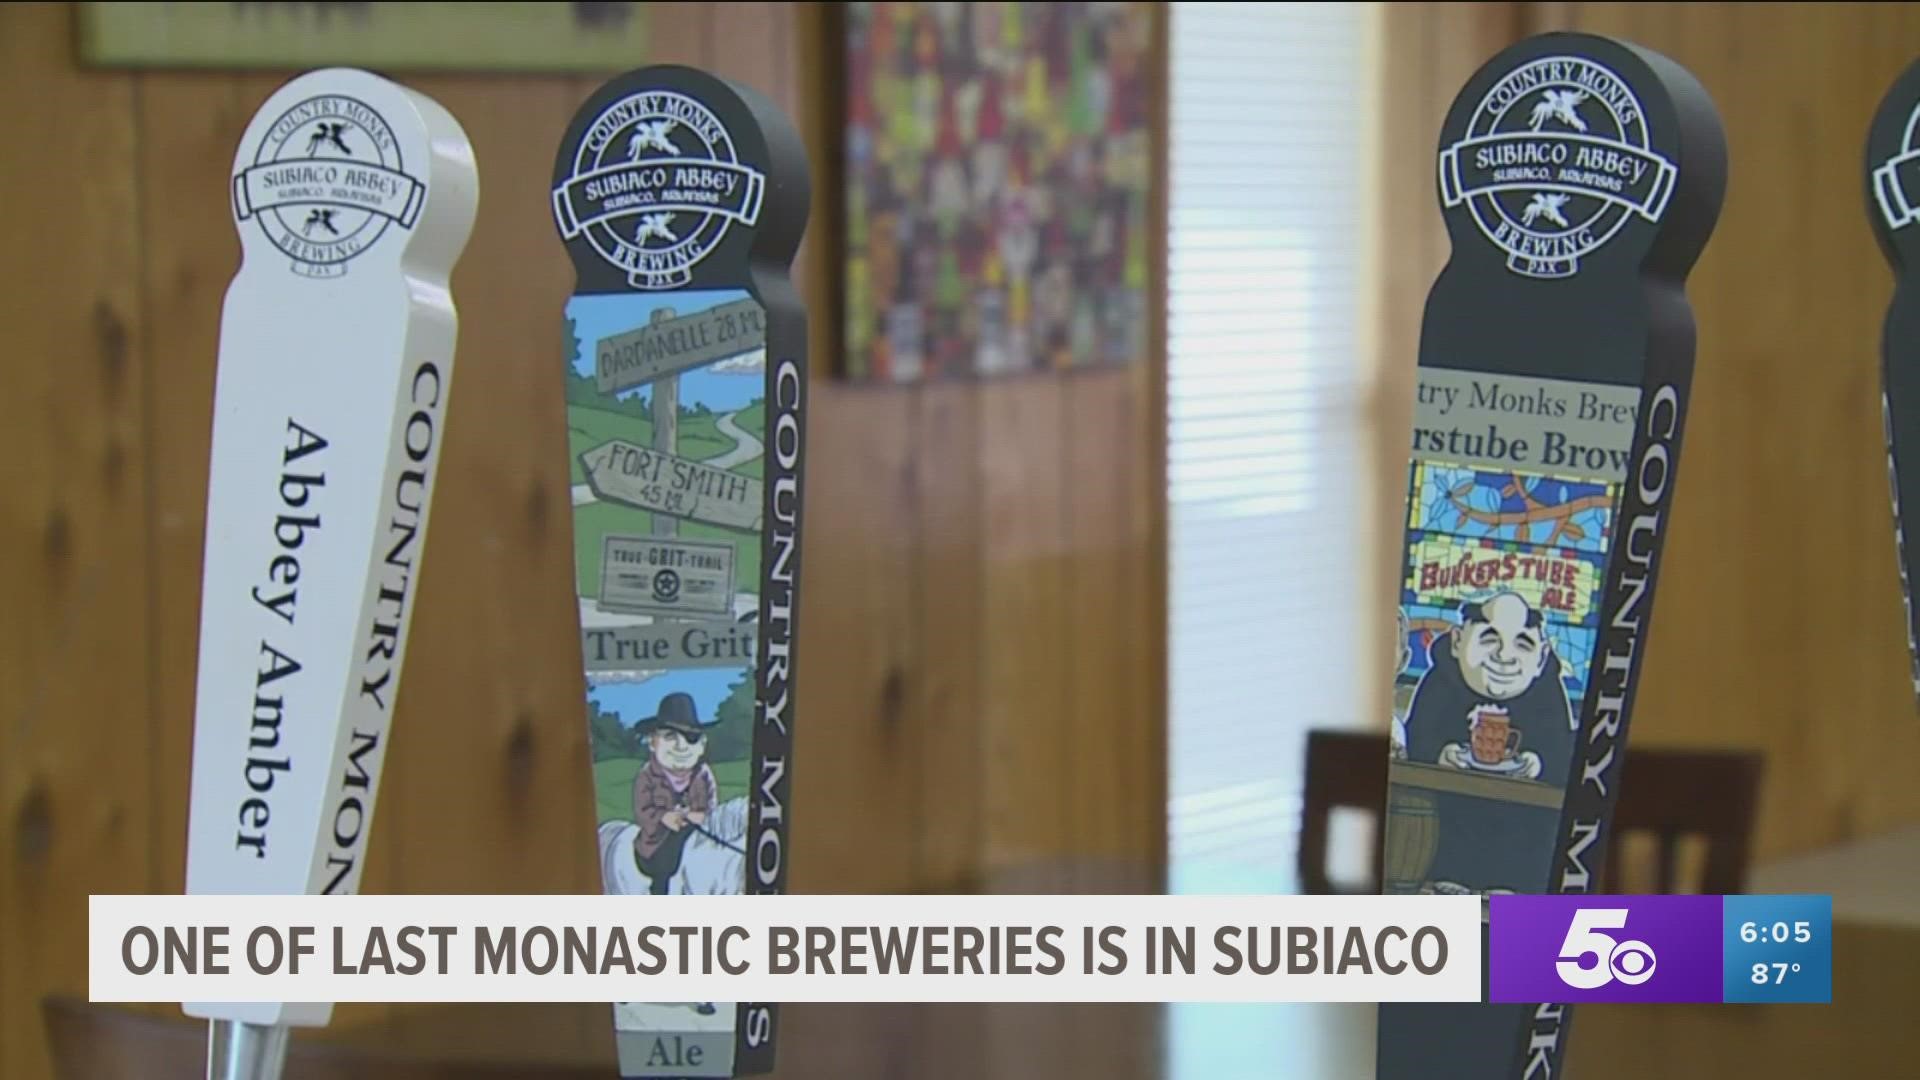 Turning water into... beer? That's what Country Monk Brewing has been doing at Subiaco Abbey, tucked away in the hills of the River Valley since the 1920s.